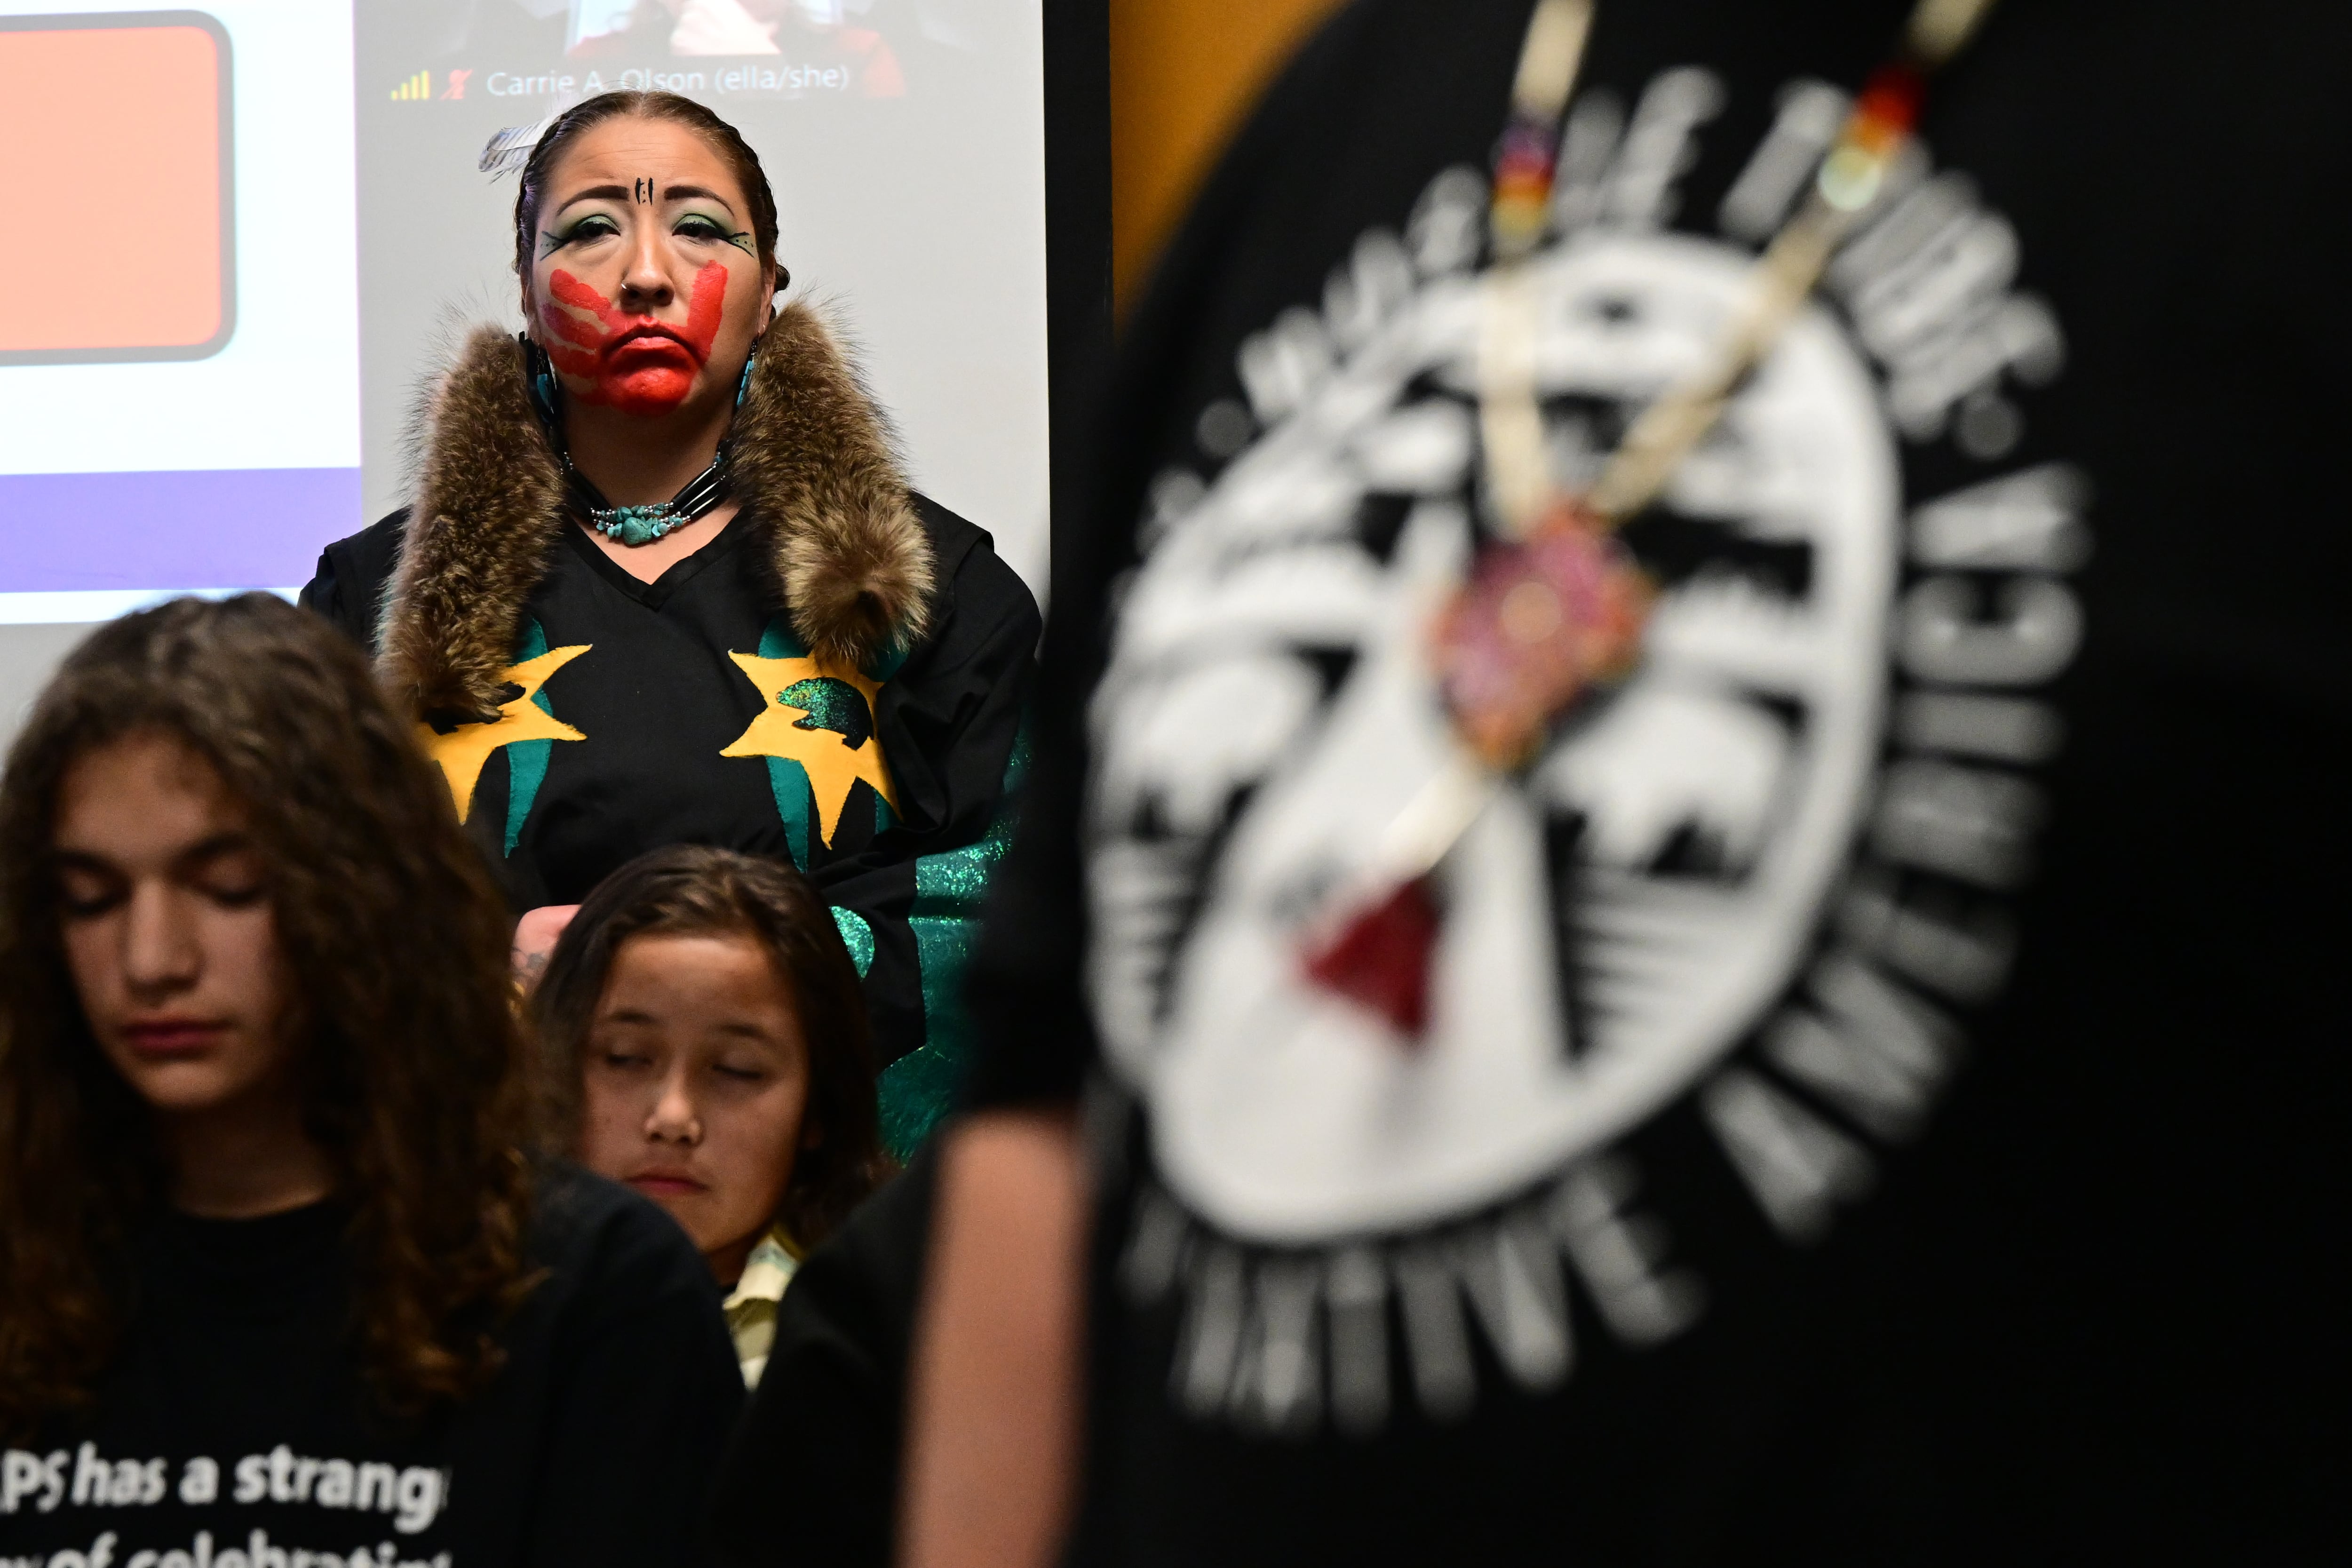 An Indigenous woman stands in the back of a crowded room listening to other speakers. She looks straight ahead. She has a large red handprint across her face. She is wearing a dark dress with yellow and blue stars.